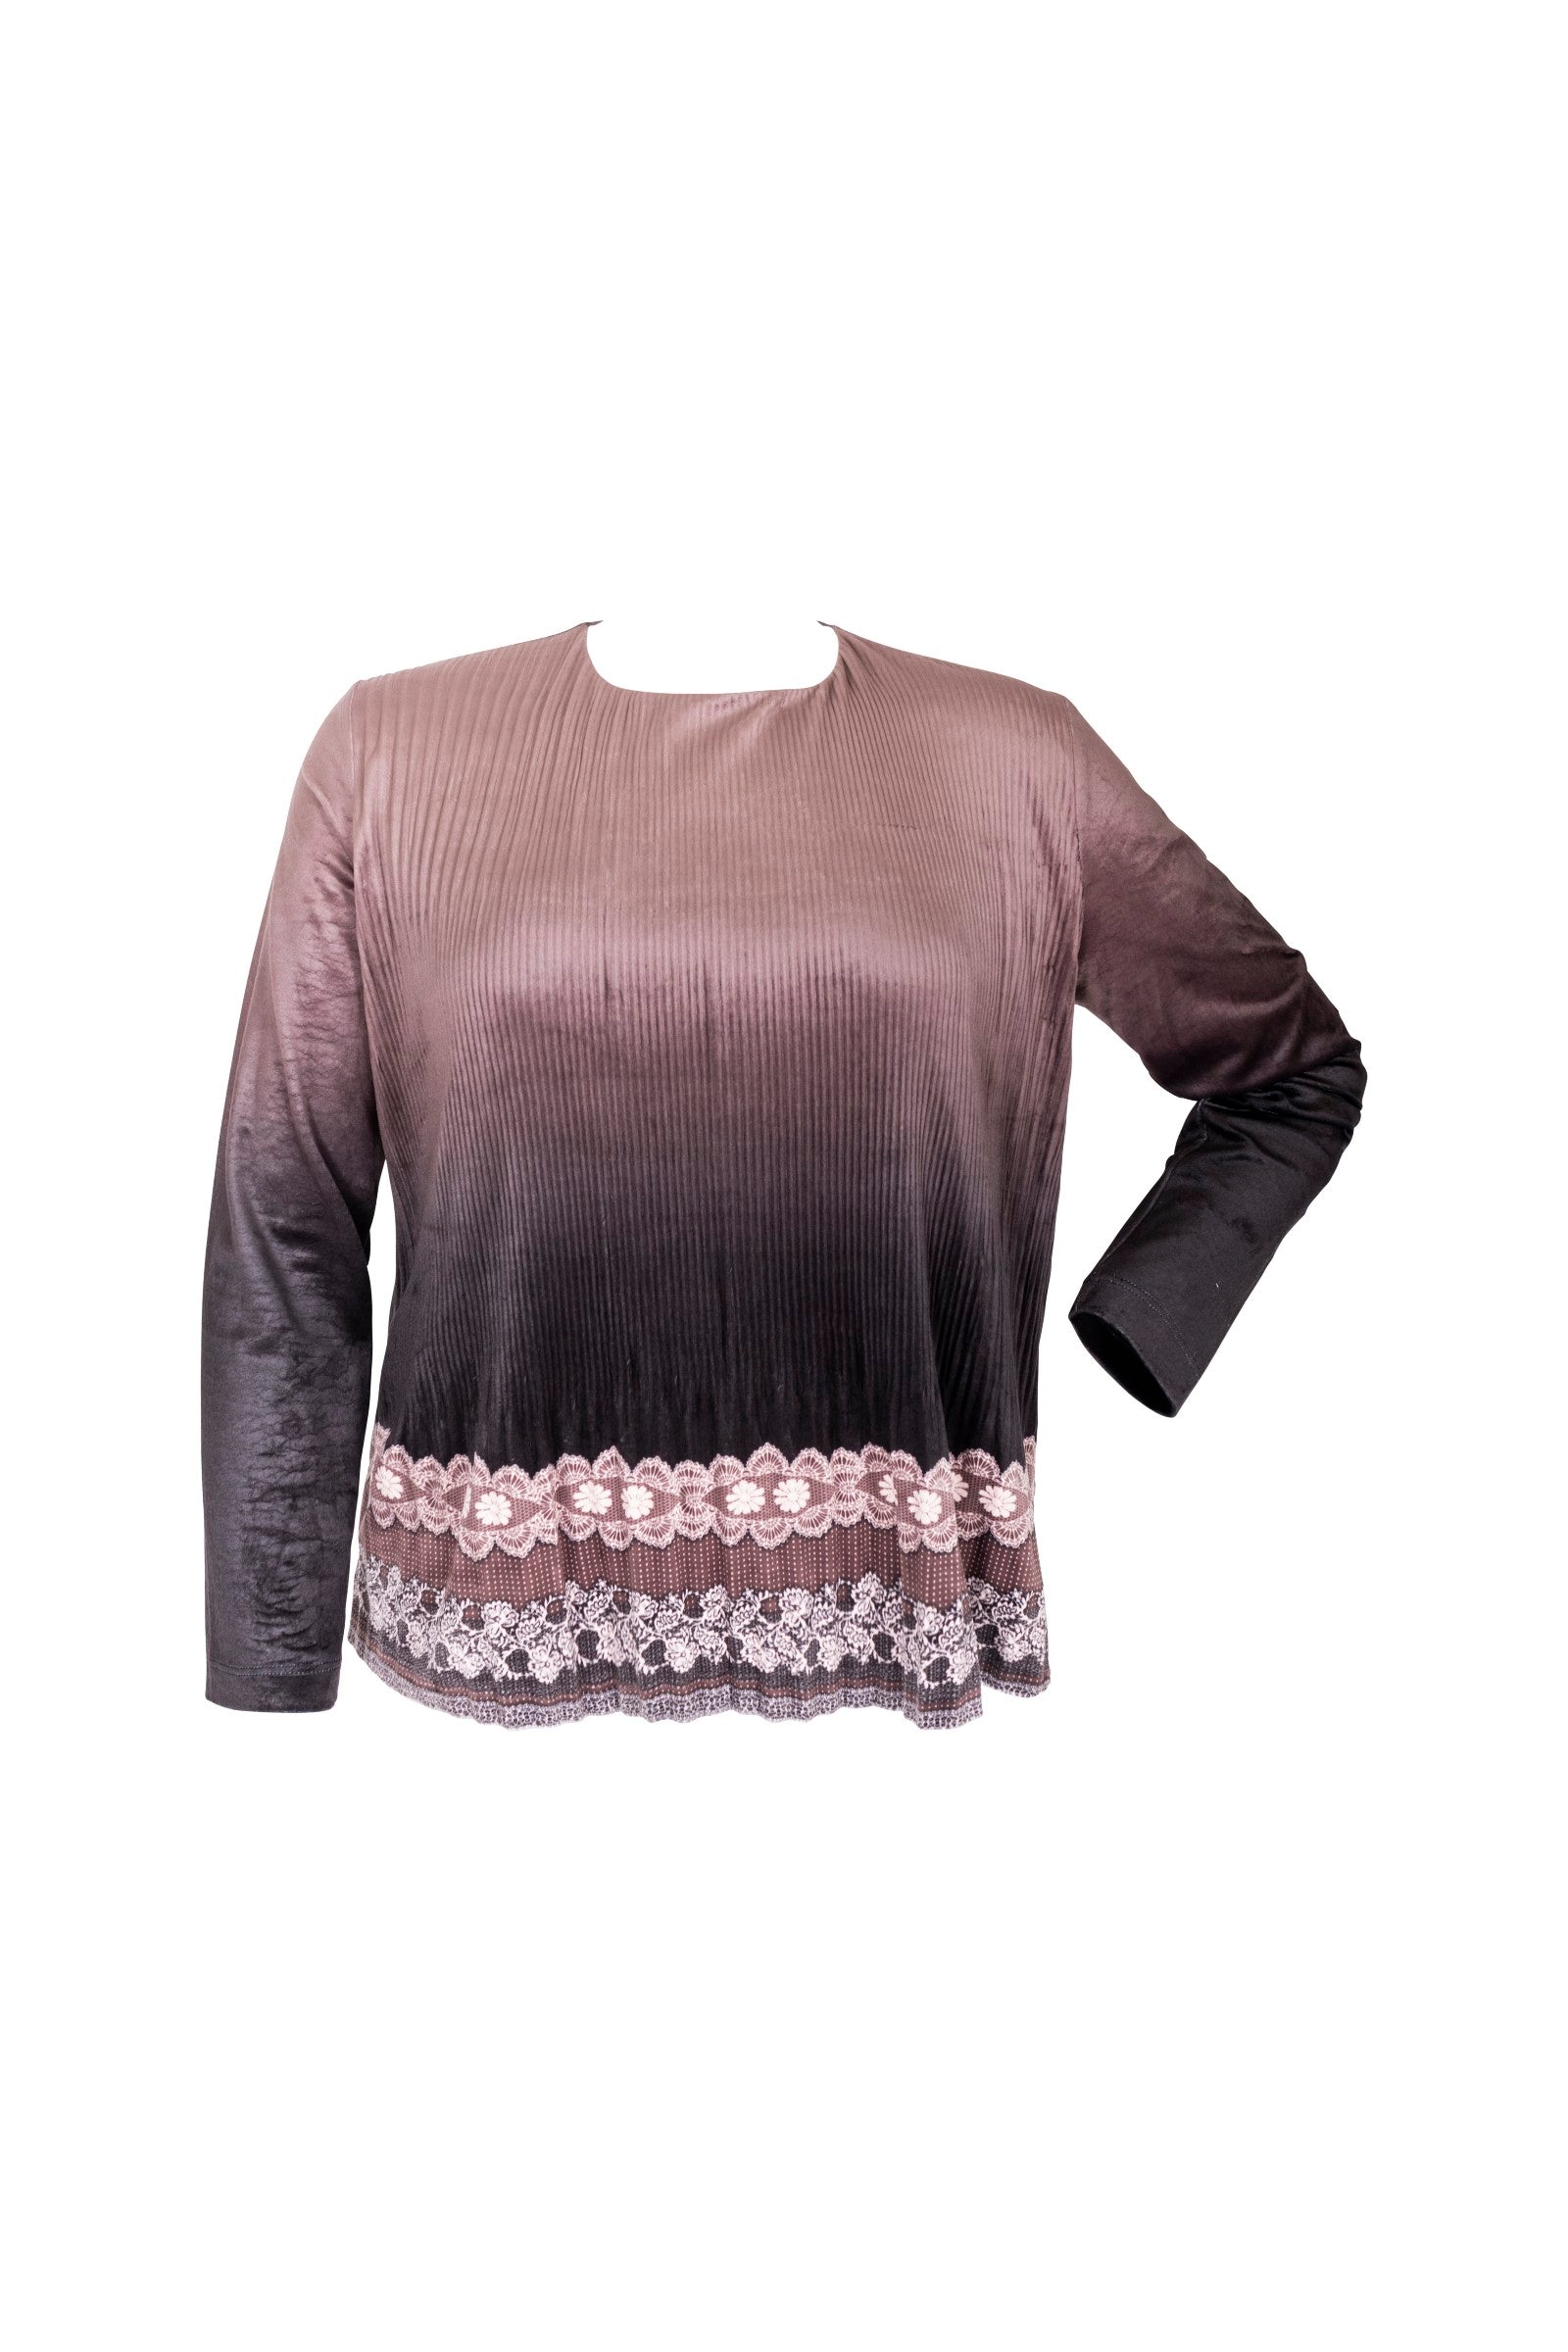 mocha top with lace print flowers bottom